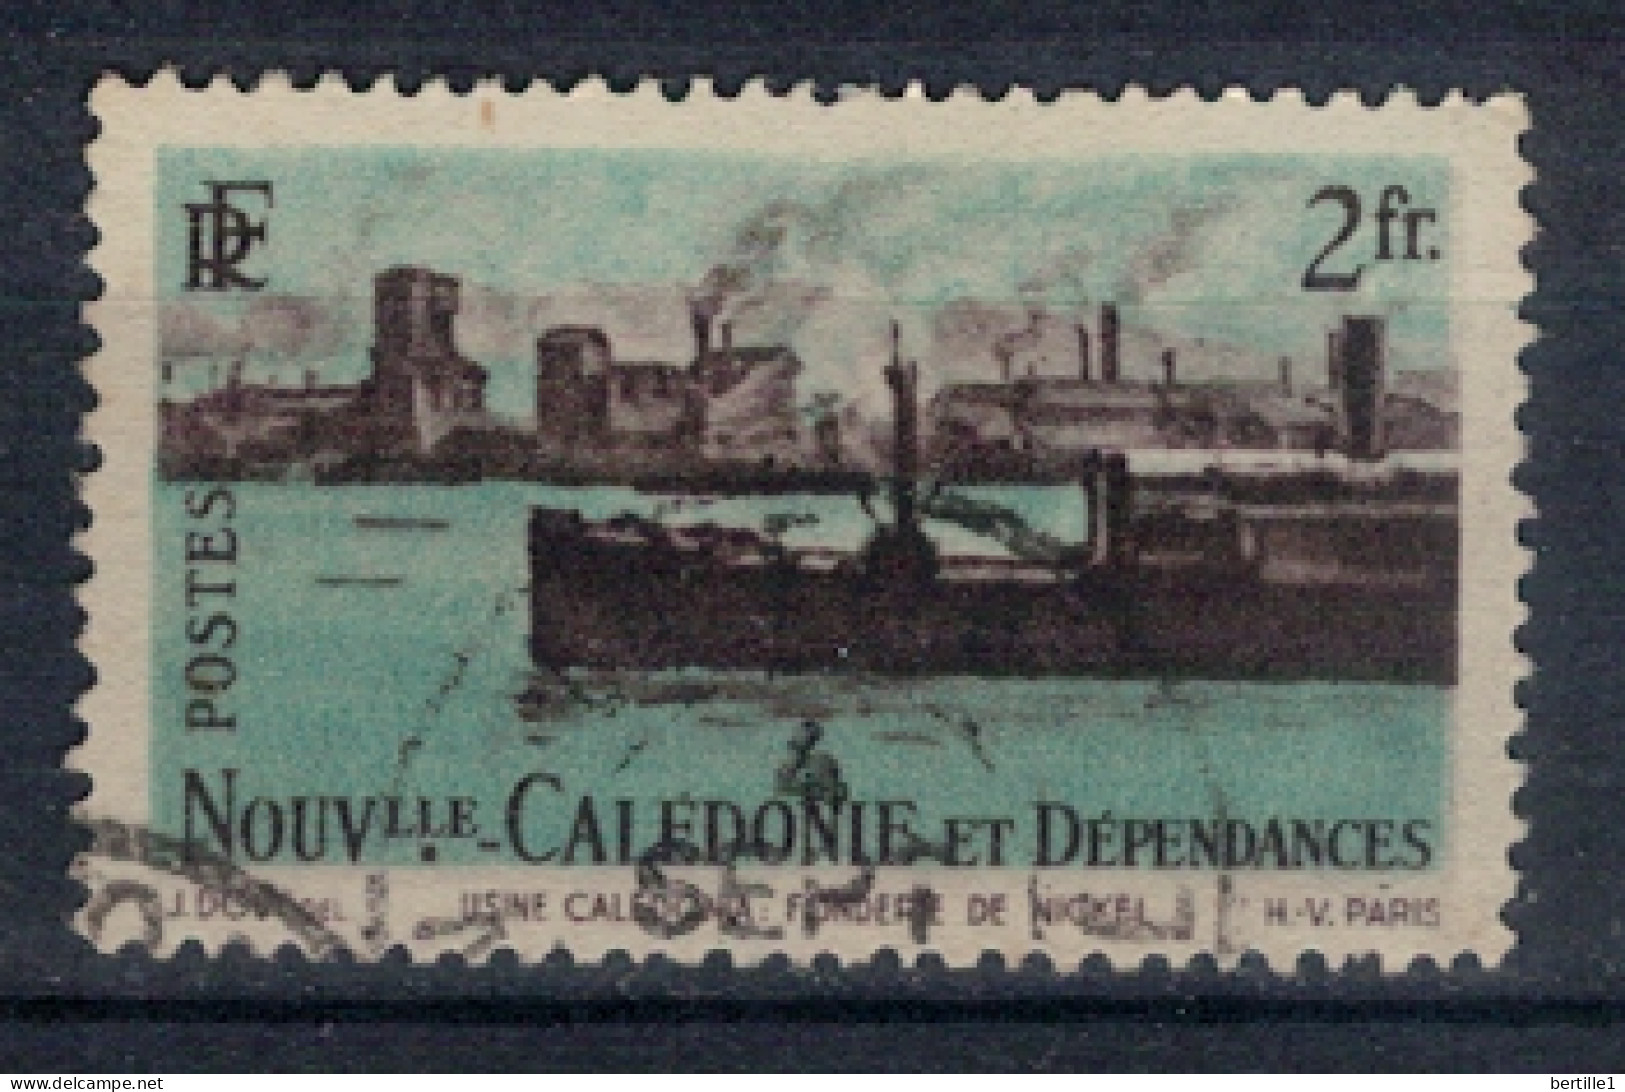 NOUVELLE CALEDONIE               N°  YVERT  268 ( 6 ) OBLITERE    ( OB 11/ 36 ) - Used Stamps